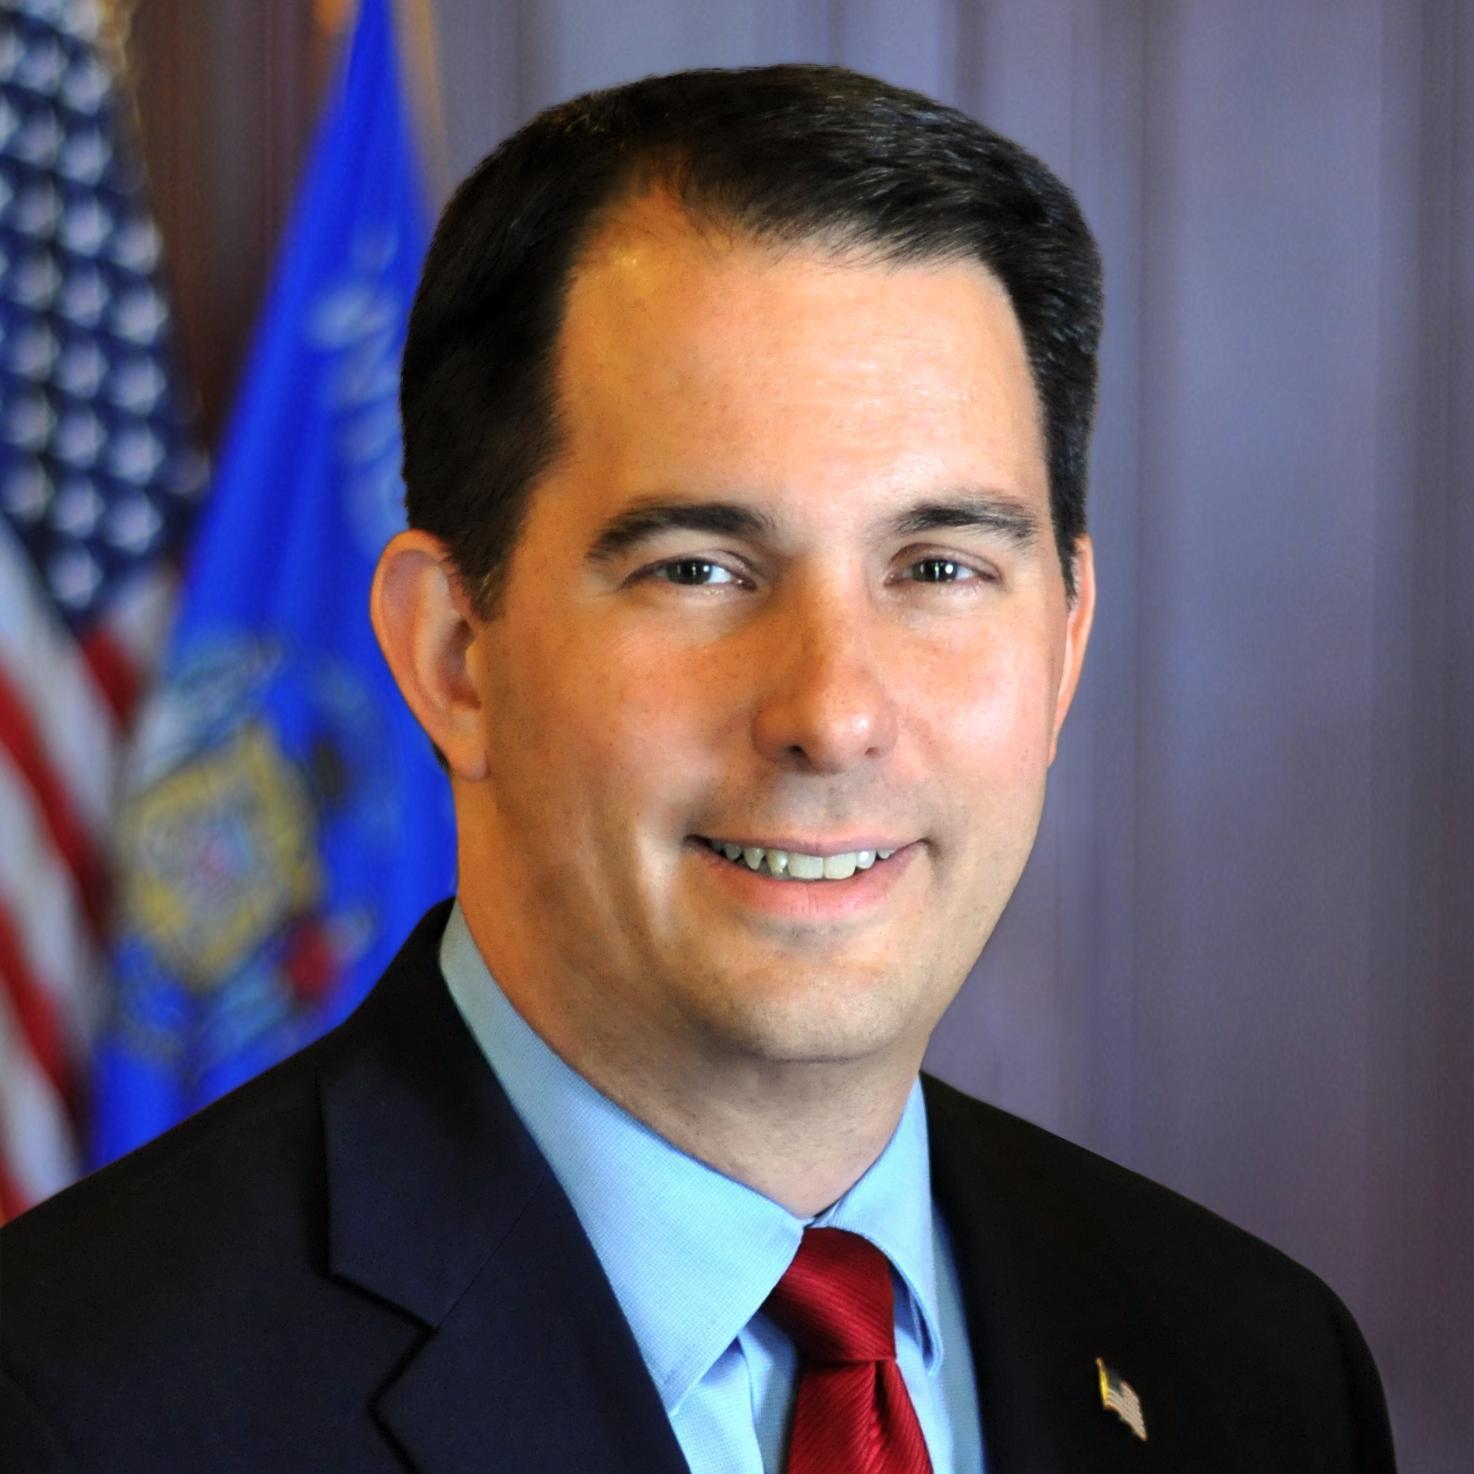 Official Twitter Account of the 45th Governor of the State of Wisconsin, Scott Walker.